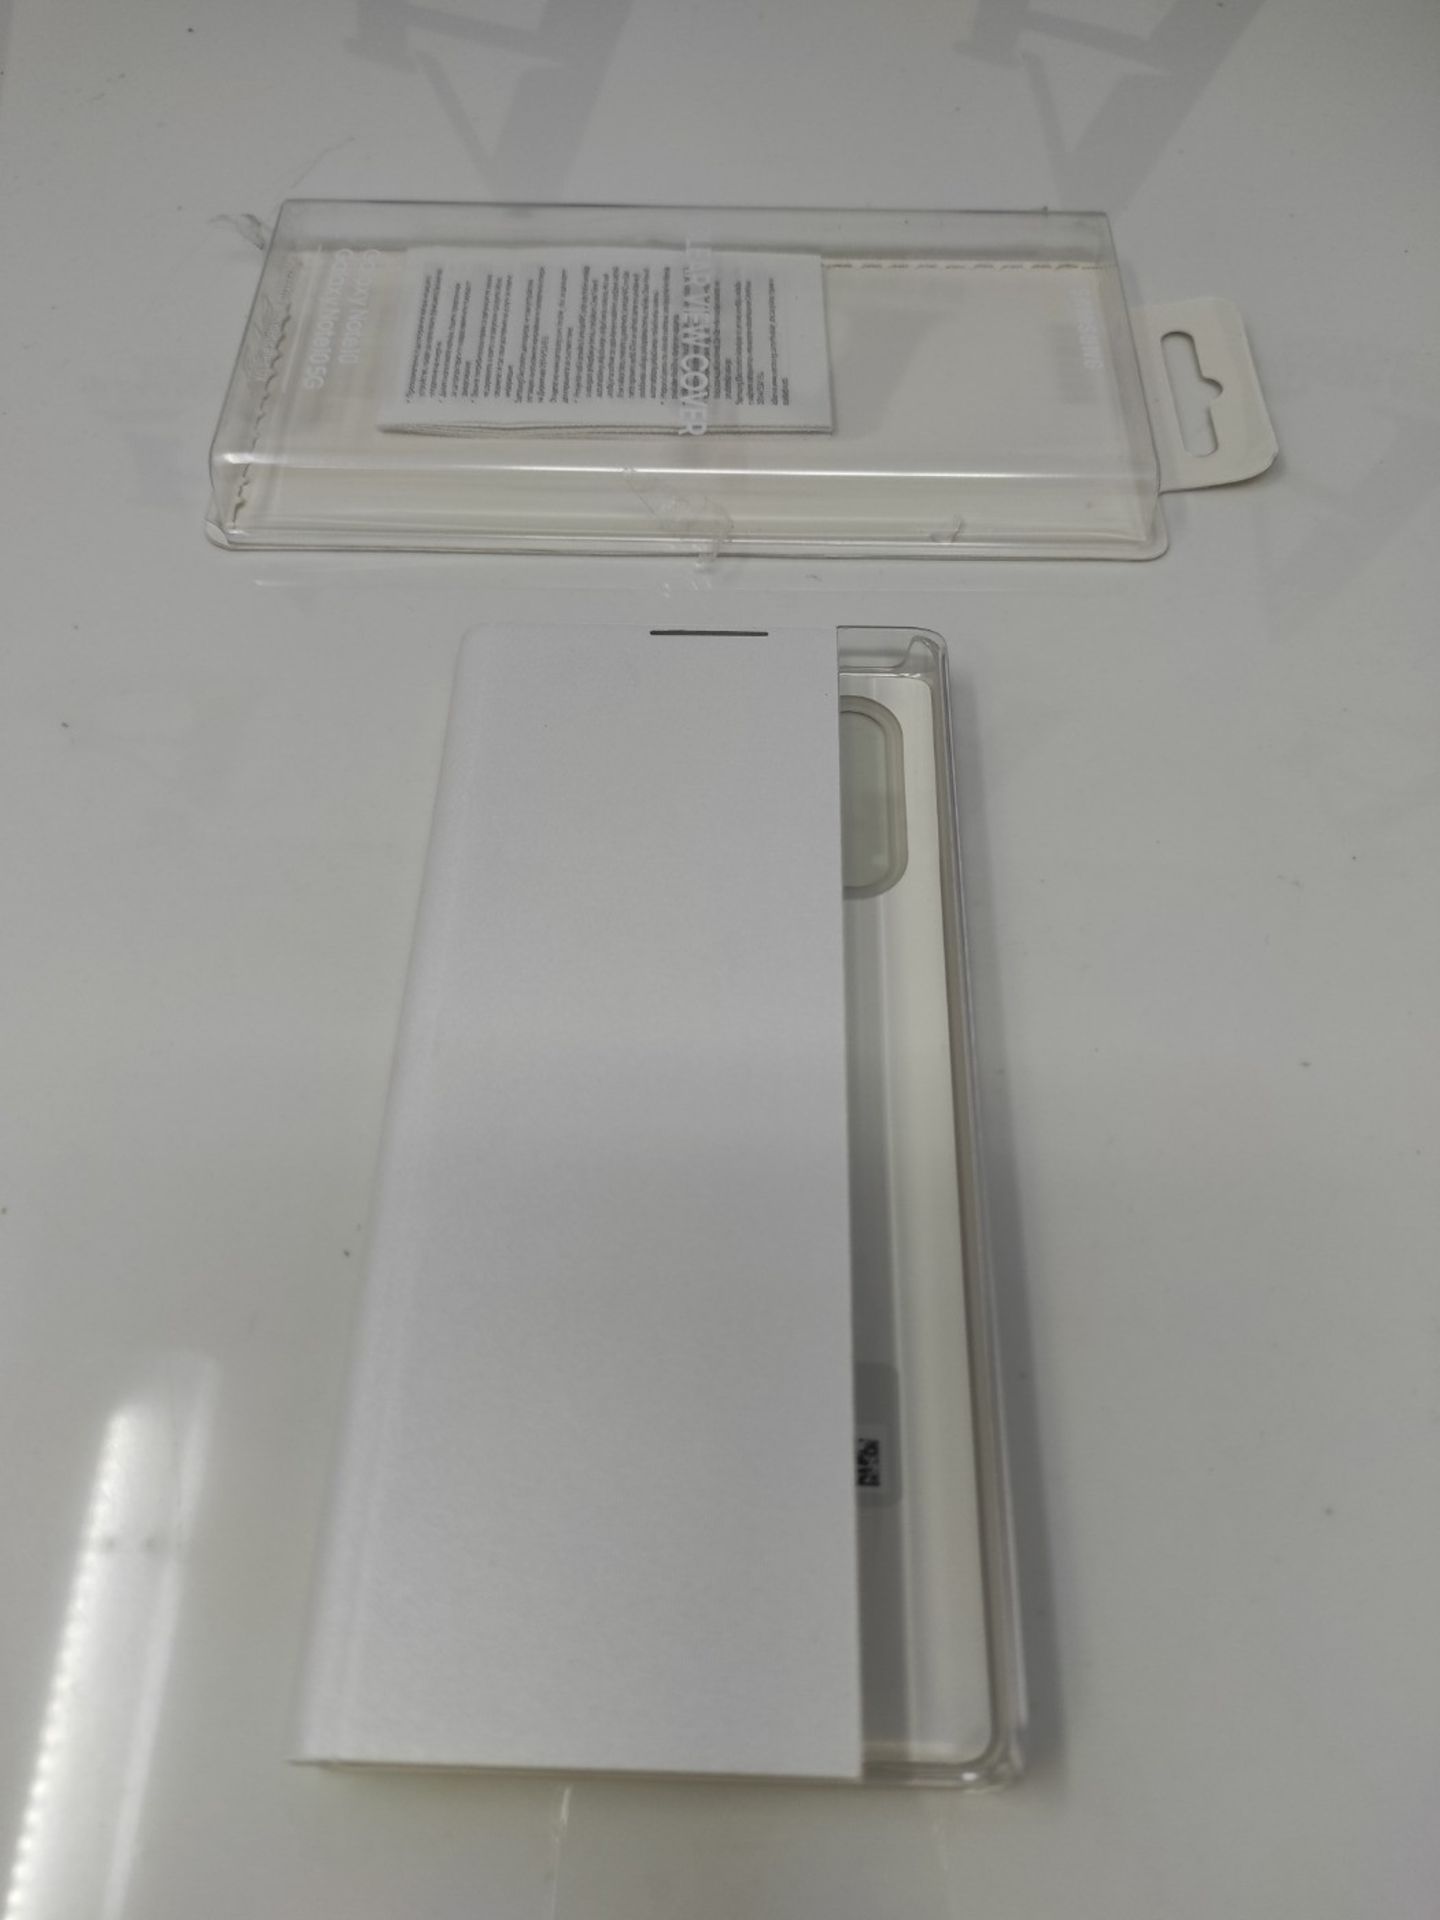 Samsung EF-Zn970- Cover for Galaxy Note10 - Image 2 of 3